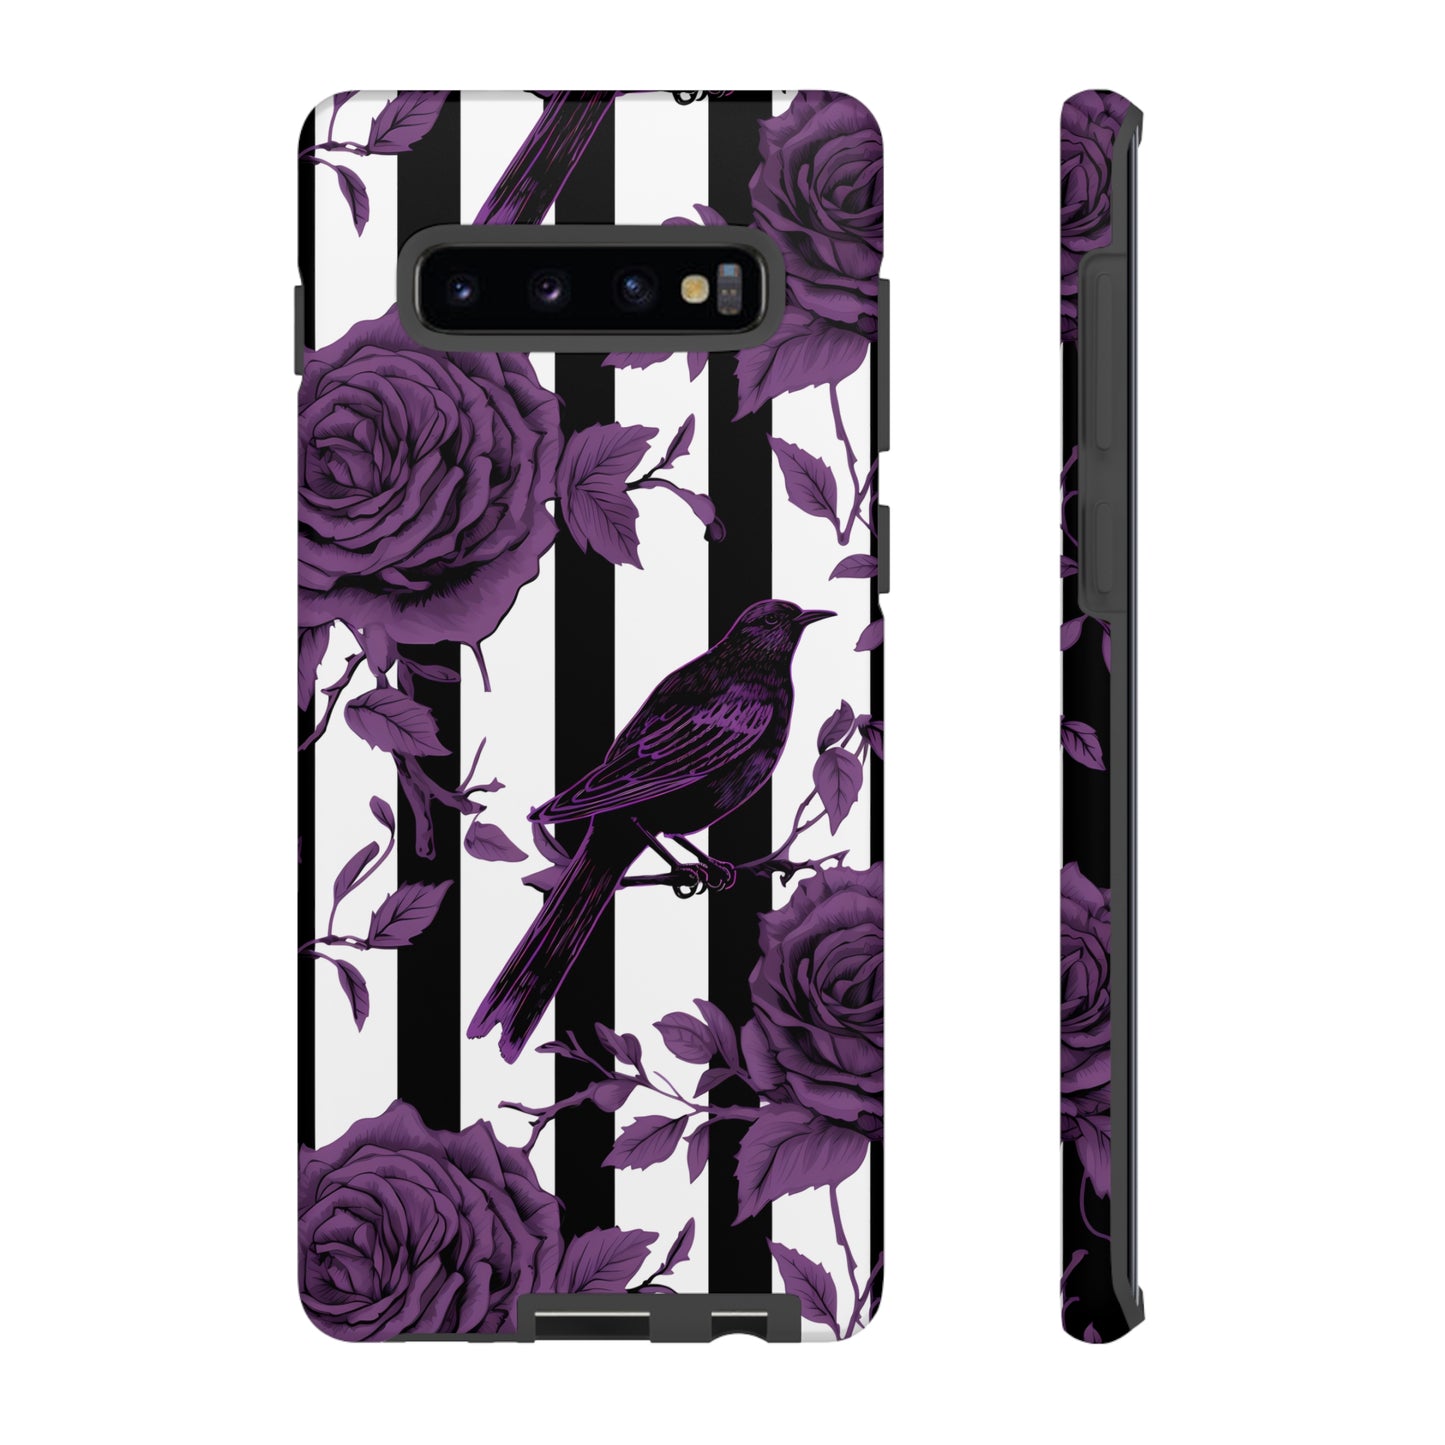 Striped Crows and Roses Tough Cases for iPhone Samsung Google PhonesPhone CaseVTZdesignsSamsung Galaxy S10 PlusMatteAccessoriescrowsGlossy